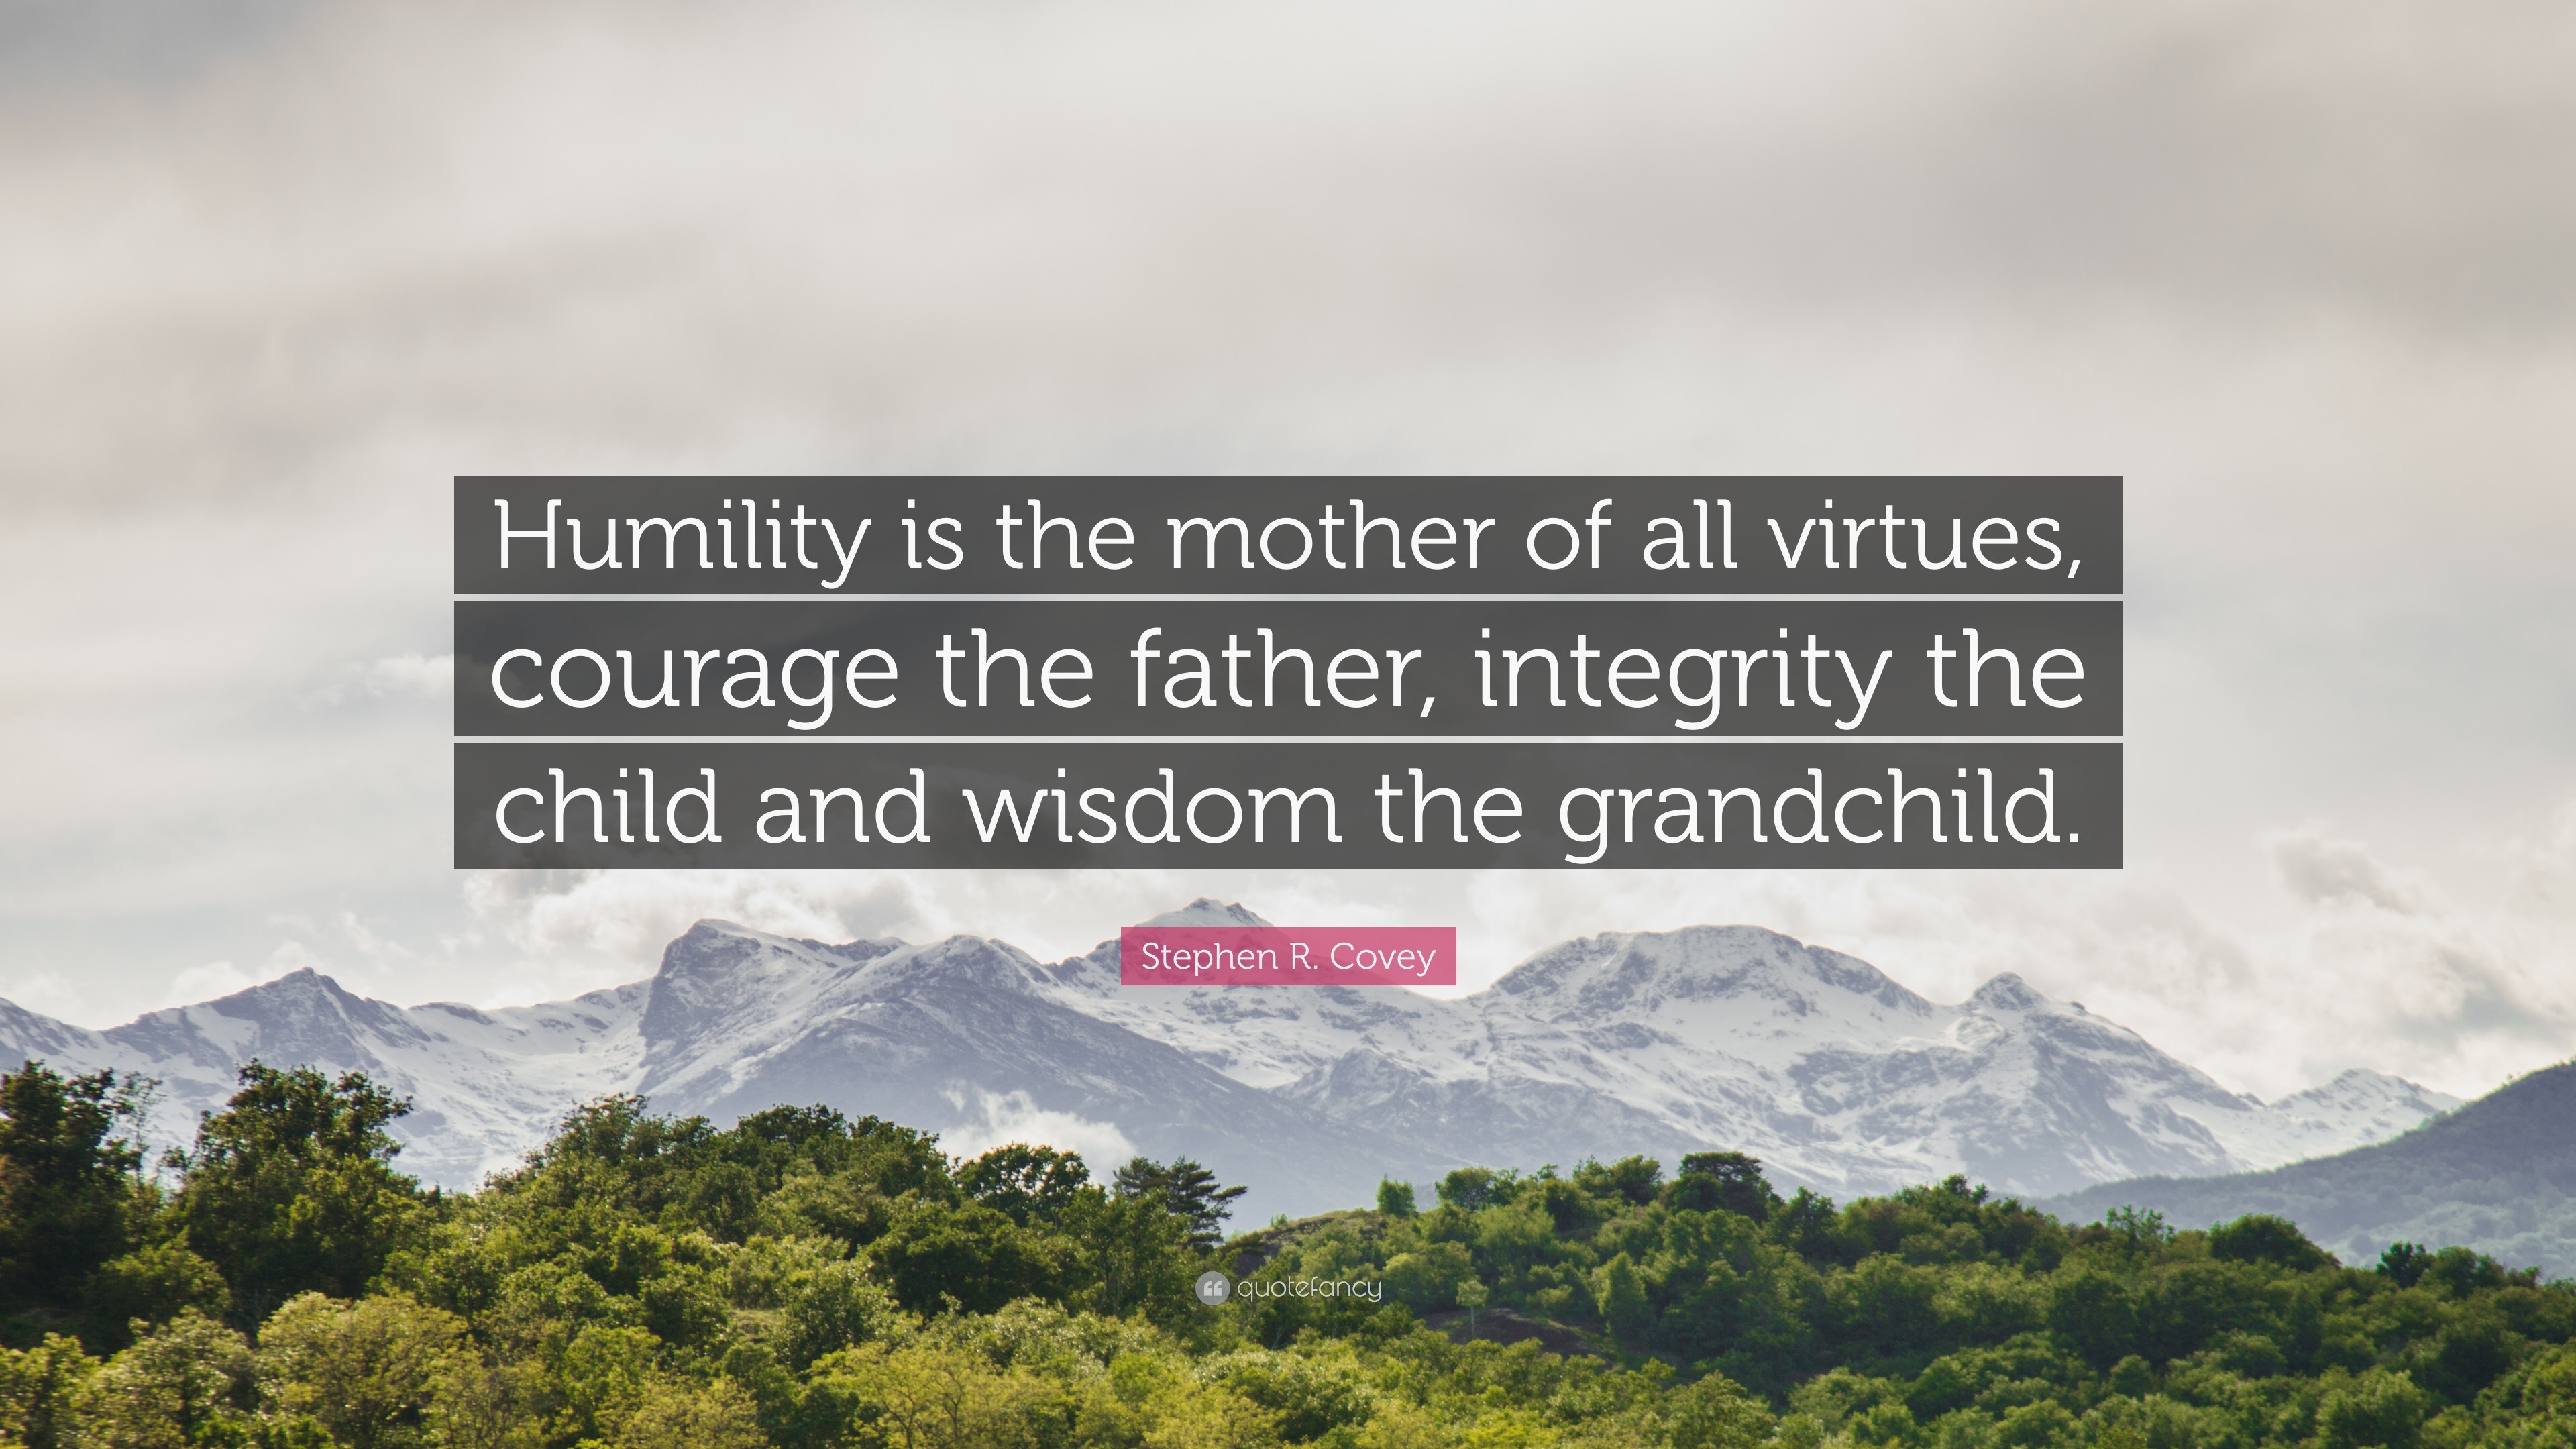 essay on humility is the mother of all virtues